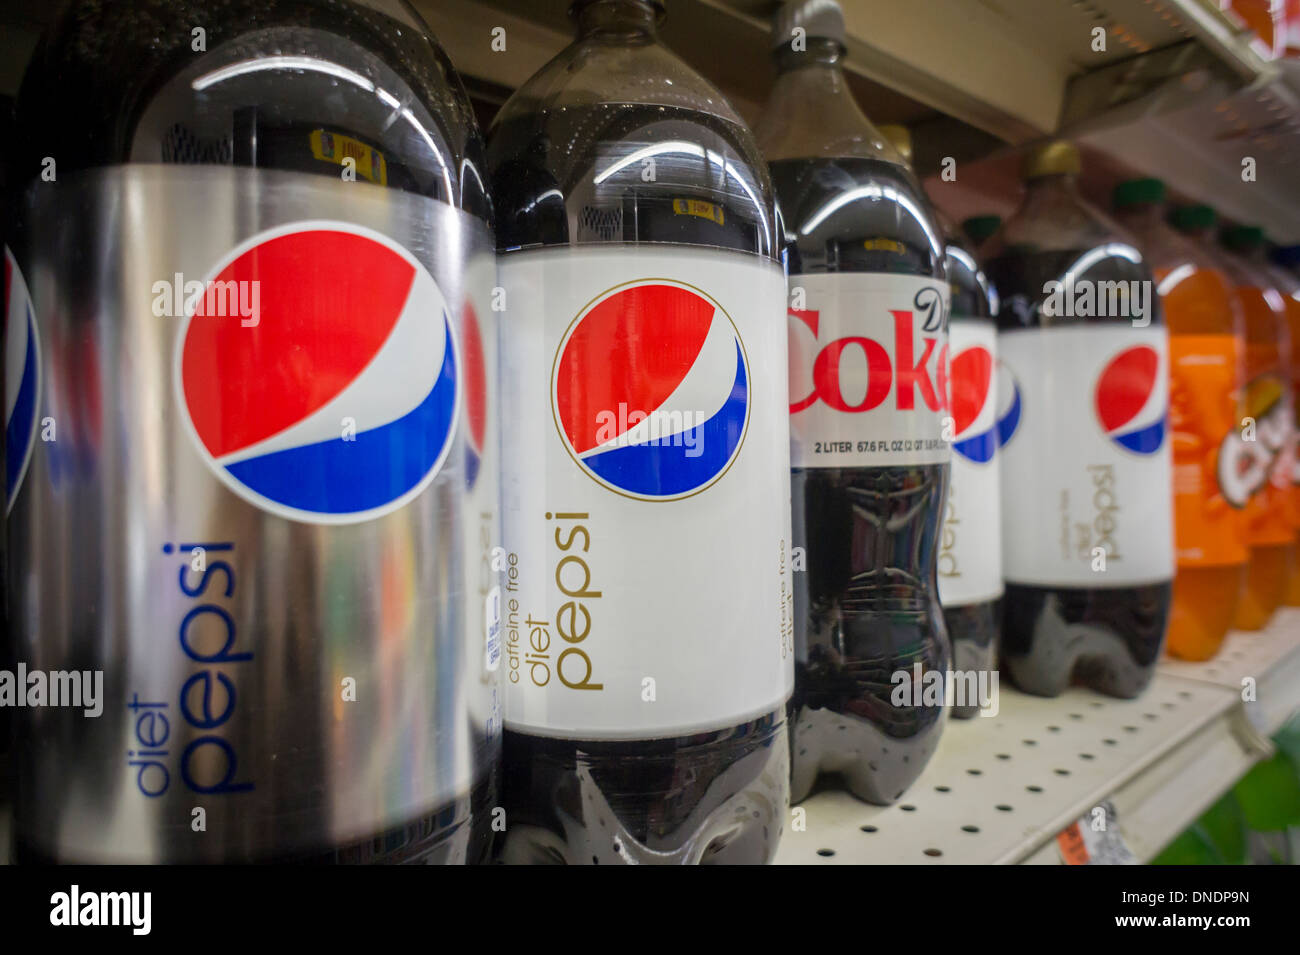 Bottles of Diet Pepsi and Diet Coke are seen on a supermarket shelf in New York Stock Photo